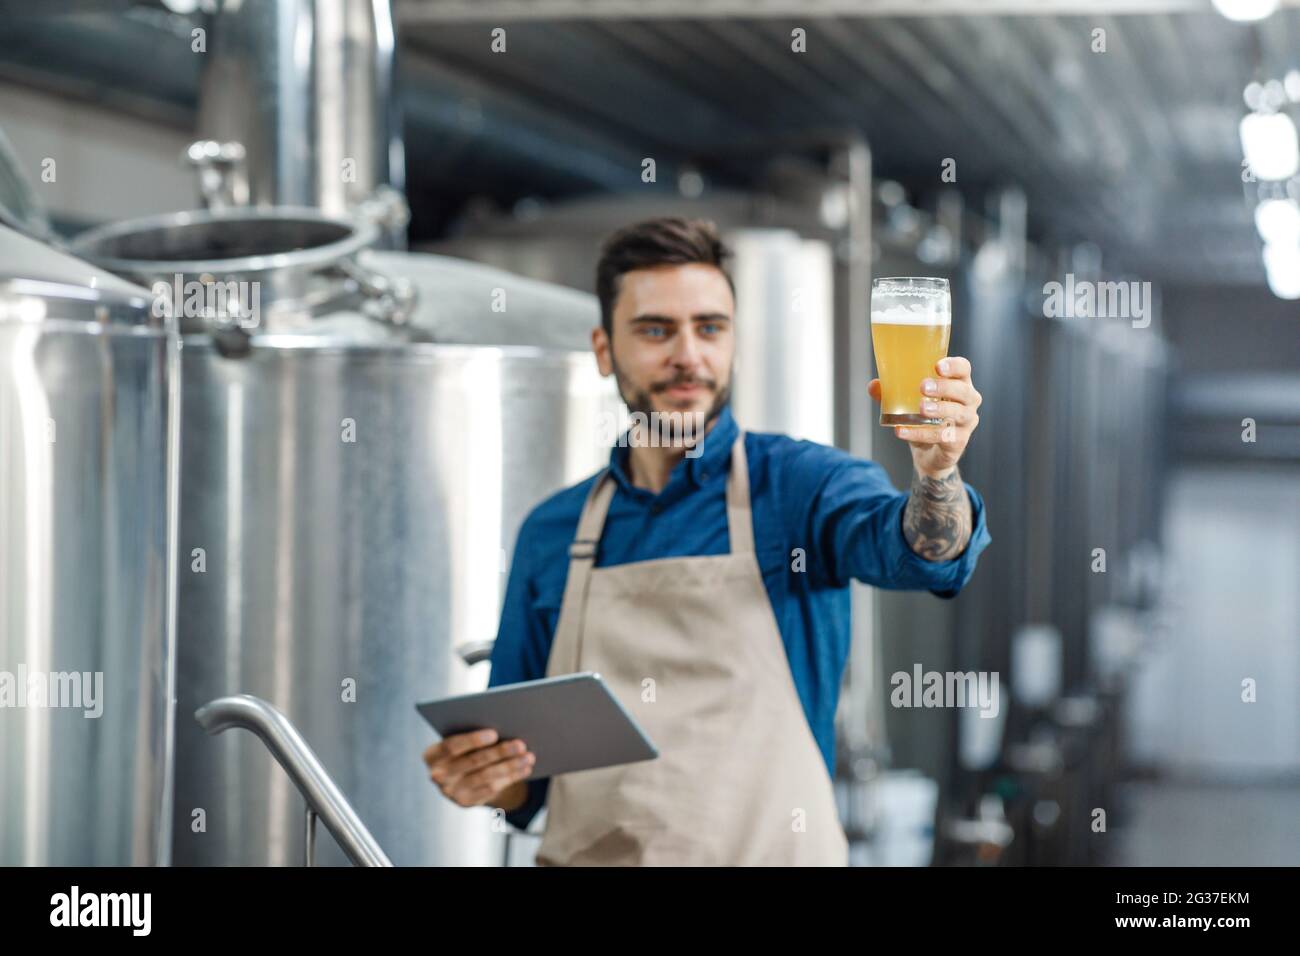 Male inspector working in distillery checks beer with app and gadget Stock Photo